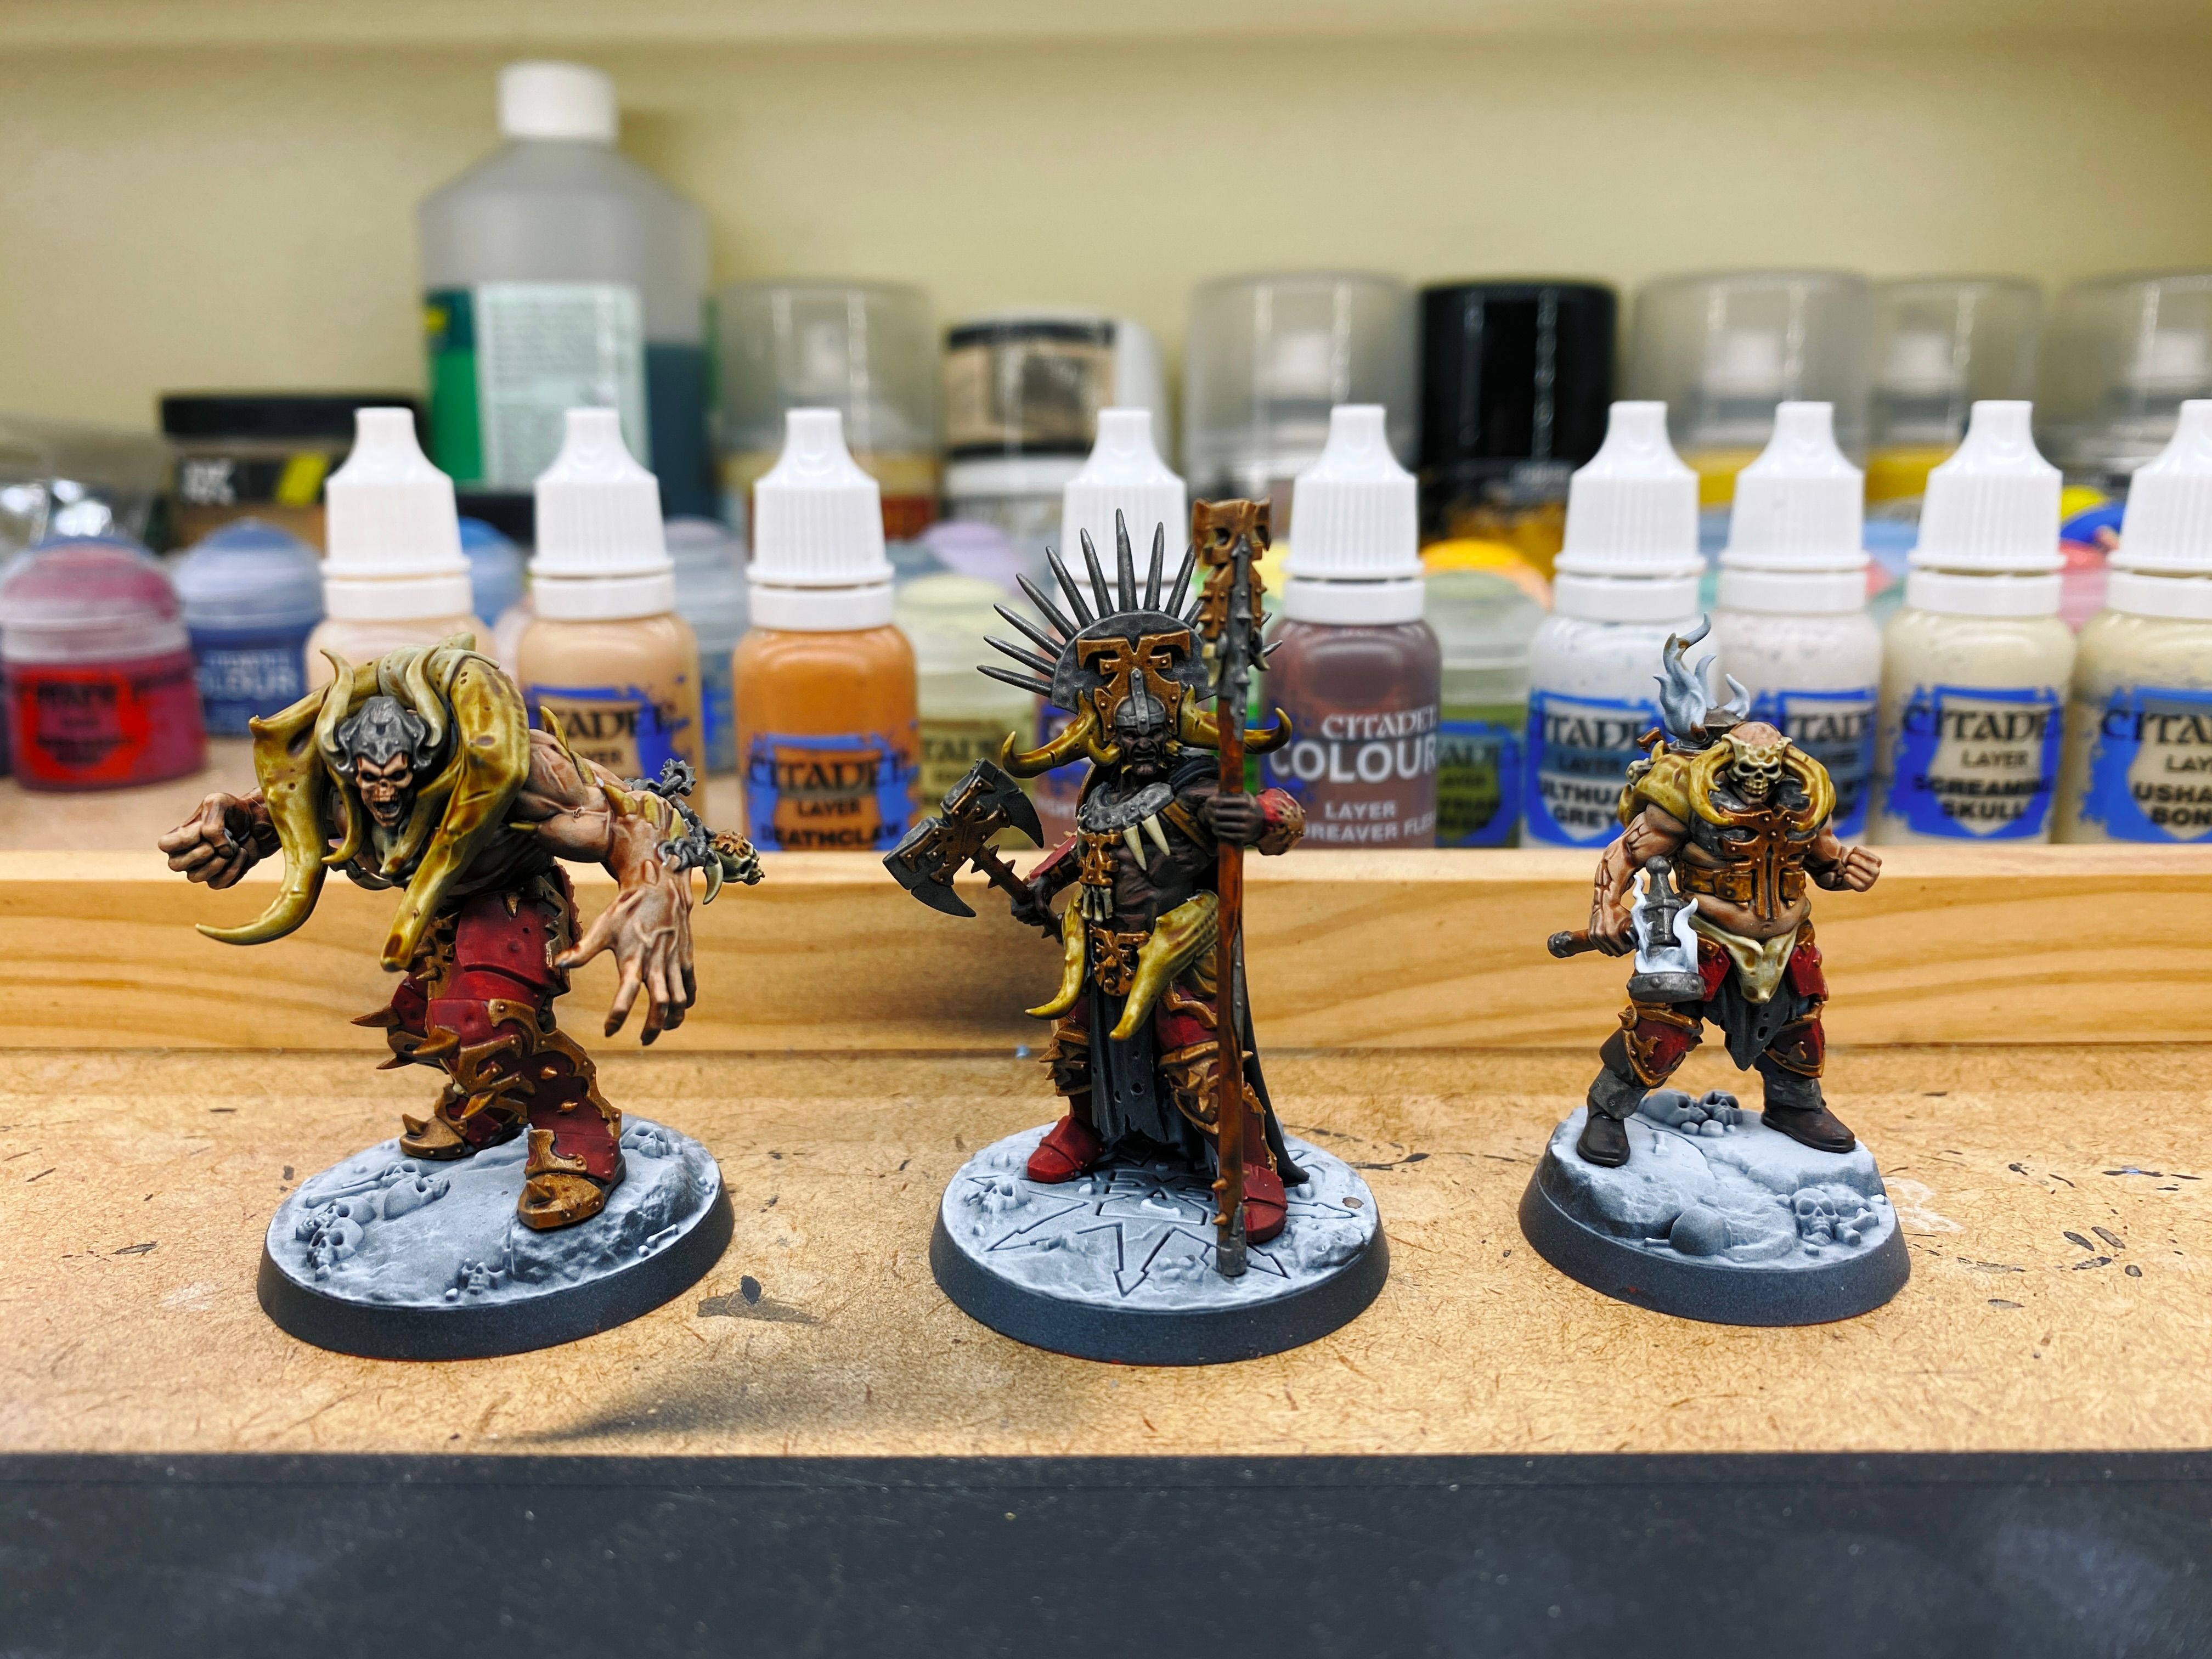 A photo of the three miniatures that make up the Warhammer Underworlds warband "Gorechosen of Dromm". They're three beefcake dudes, one's a Black guy with a big ceremonial headdress on and is wielding an axe and a staff, one has very Immortan Joe from Max Mad vibes but also with rocking dad-bod, and the other is part demon with absurdly large arms and big horns over his shoulders.